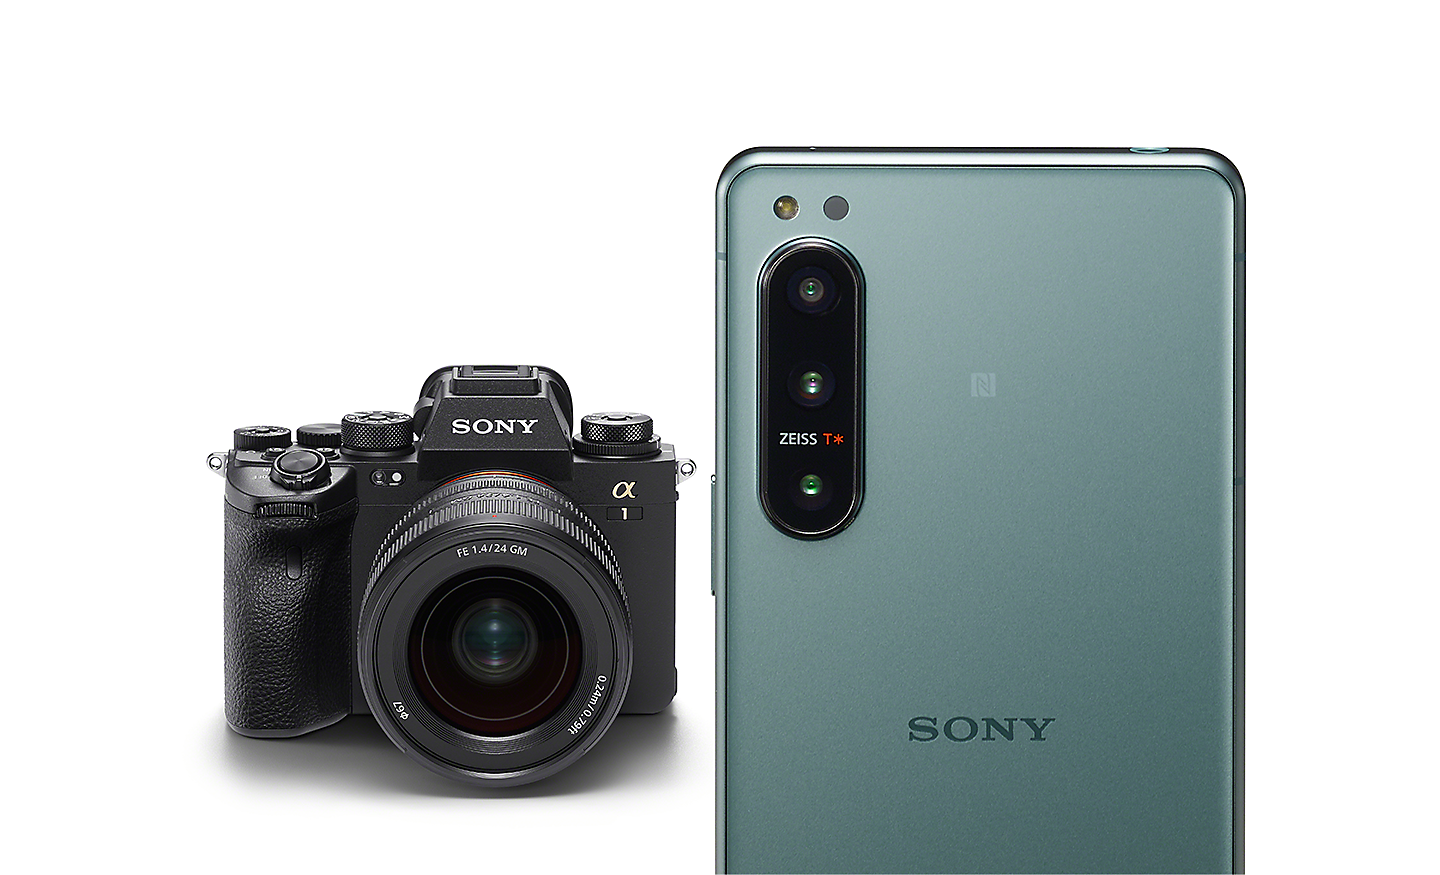 Xperia 5 IV in the foreground, an Alpha series camera in the background